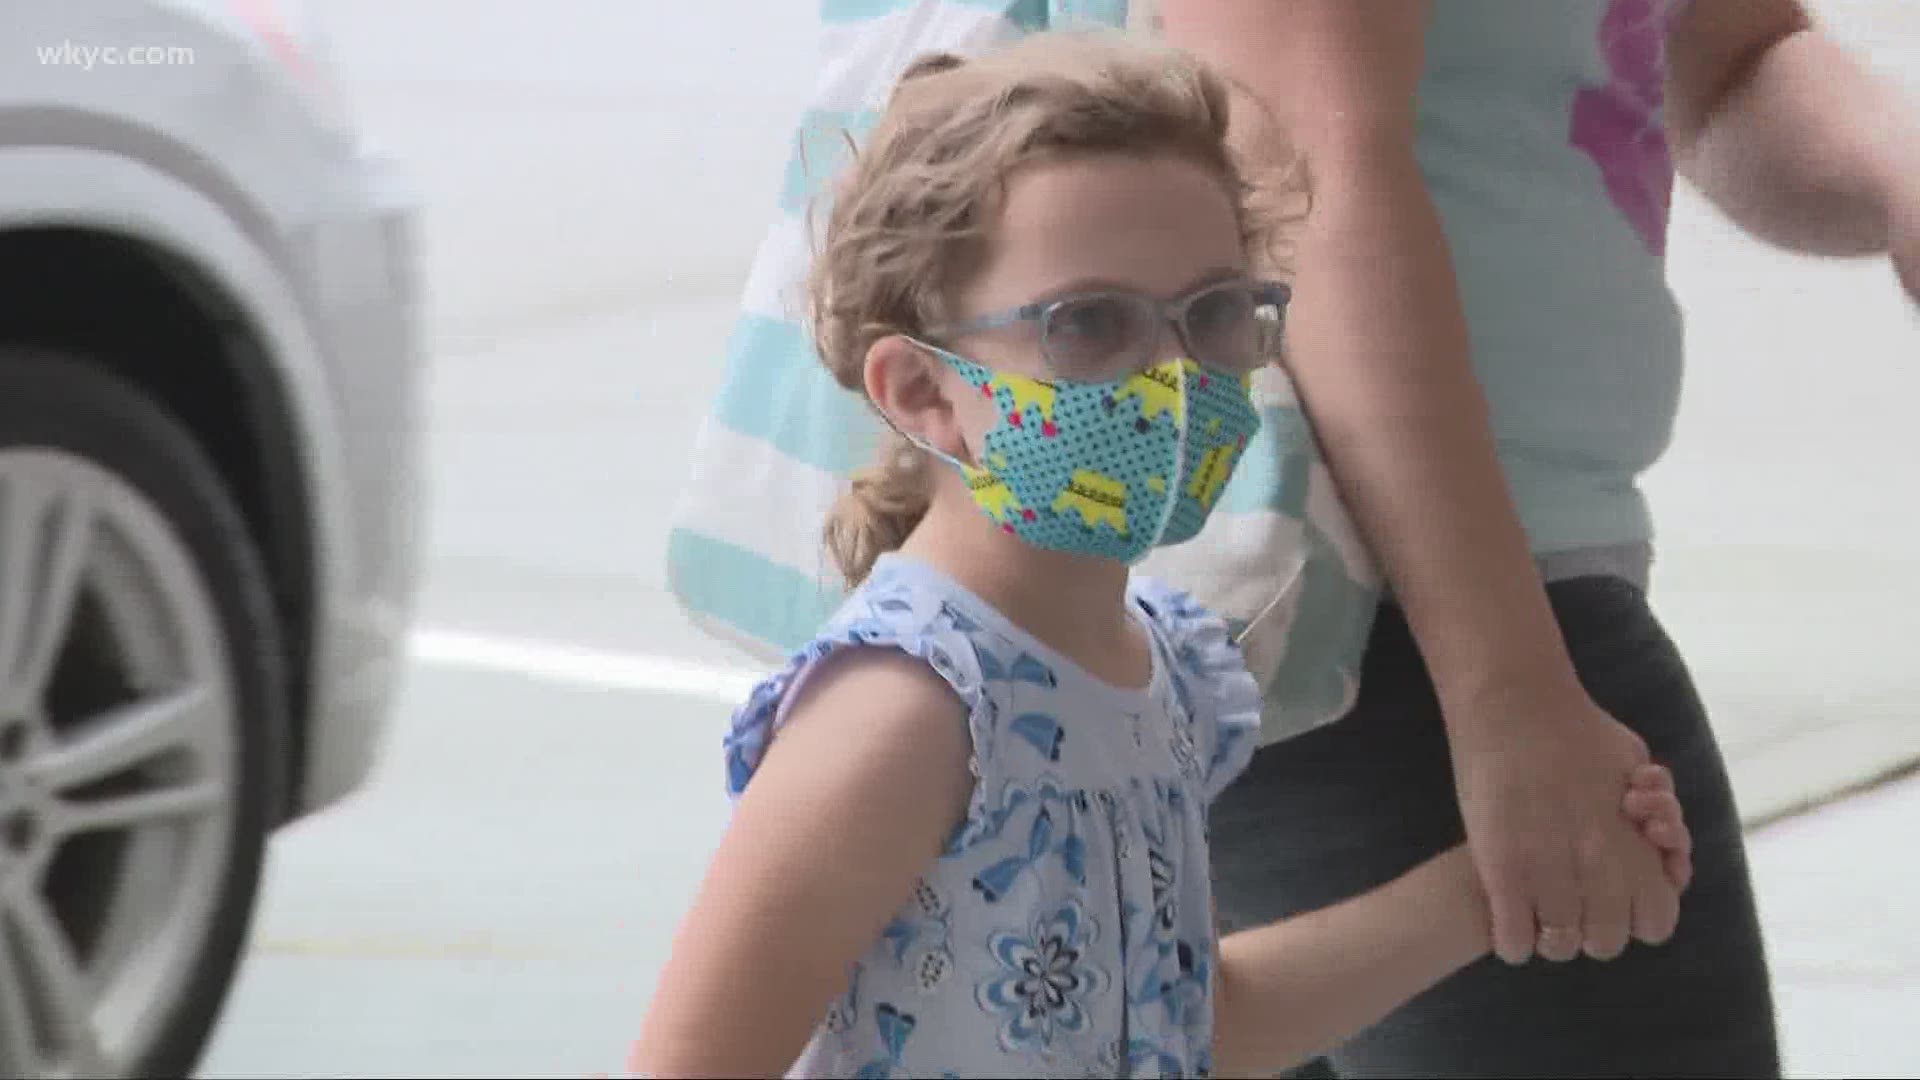 Ohio Governor Mike DeWine has announced that all counties in the state will be required to wear masks beginning on Thursday. Laura Caso has the break down.